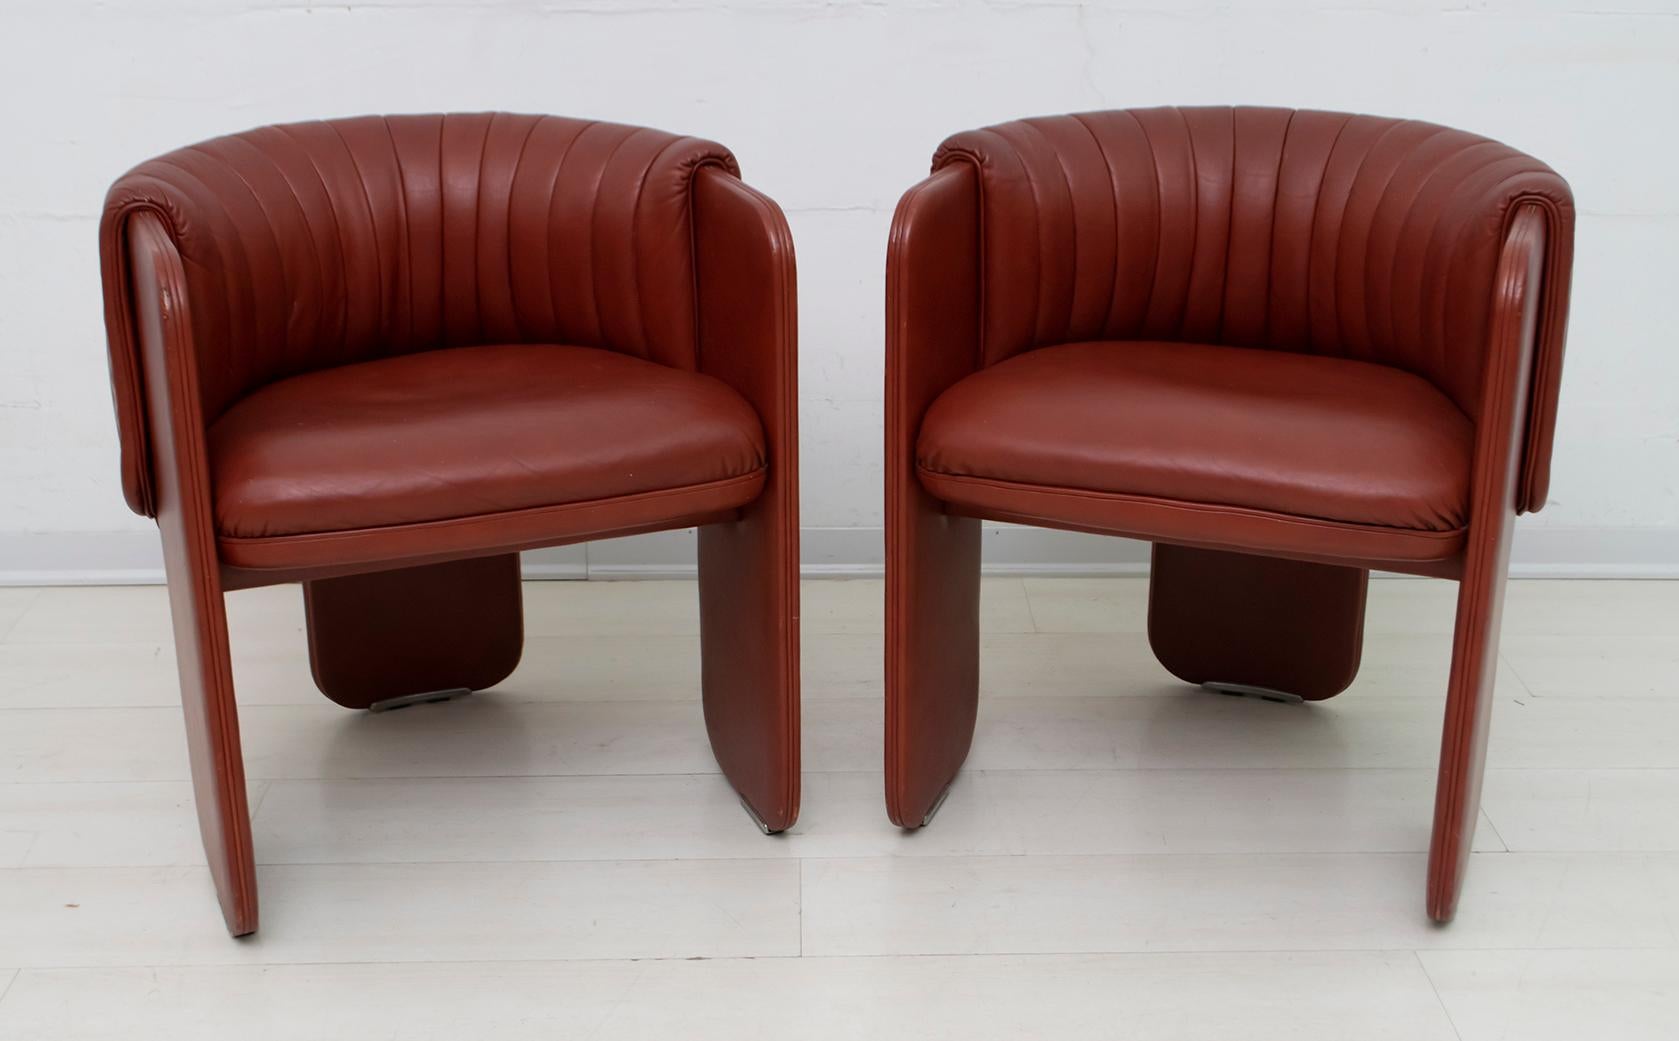 Luigi Massoni for Poltrona Frau. Two Dinette model cockpit armchairs entirely upholstered in leather, 1980s. Very rare!

